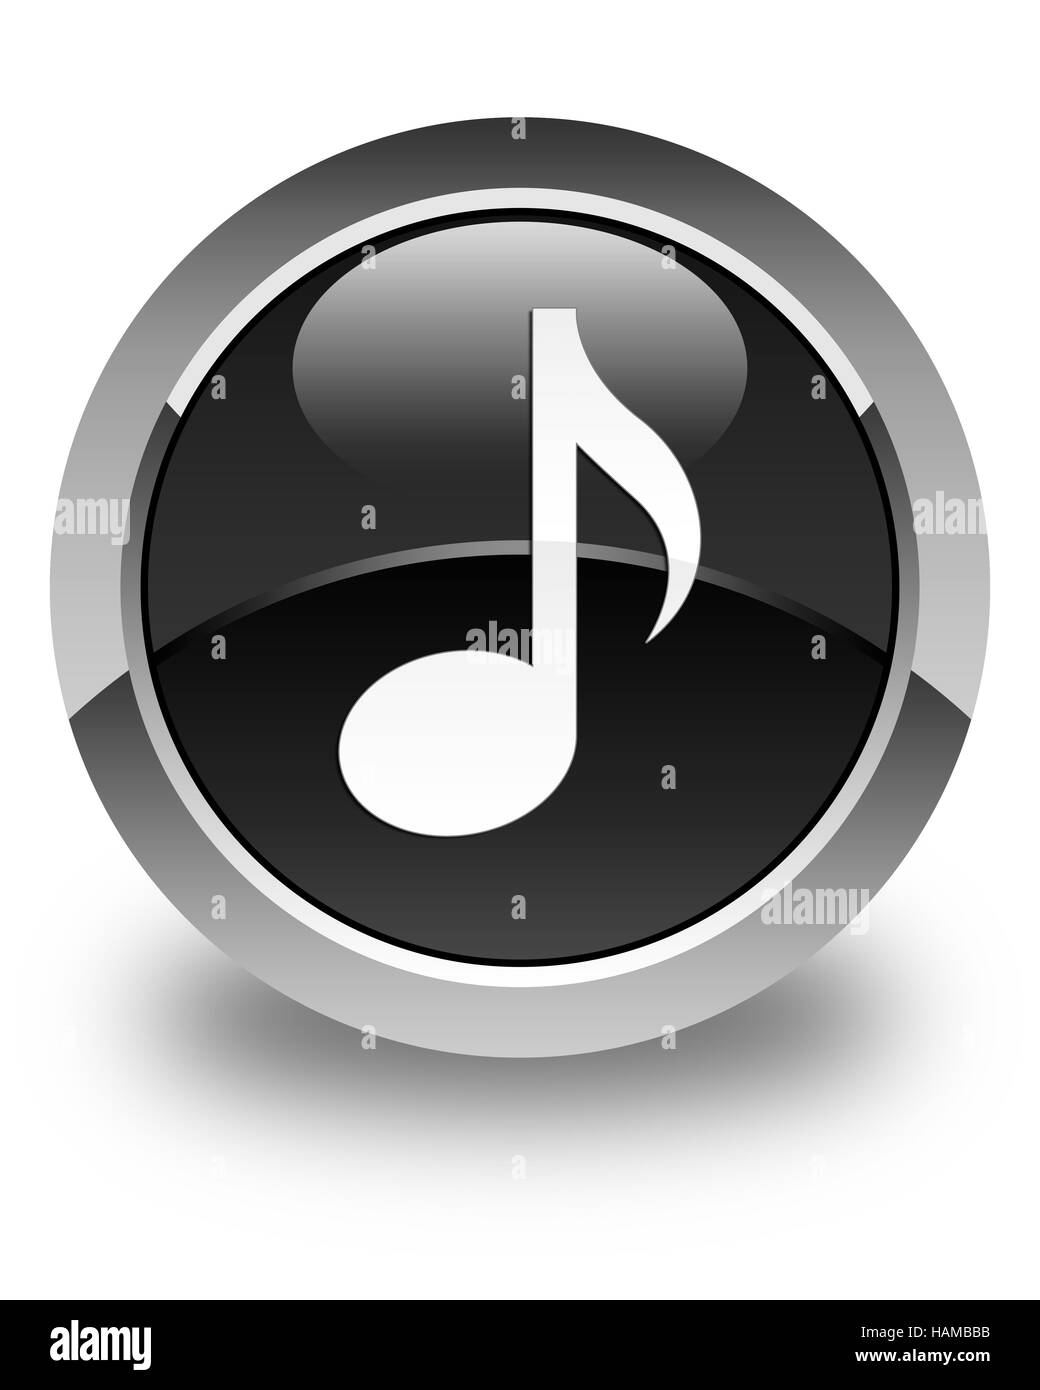 Music icon isolated on glossy black round button abstract illustration Stock Photo